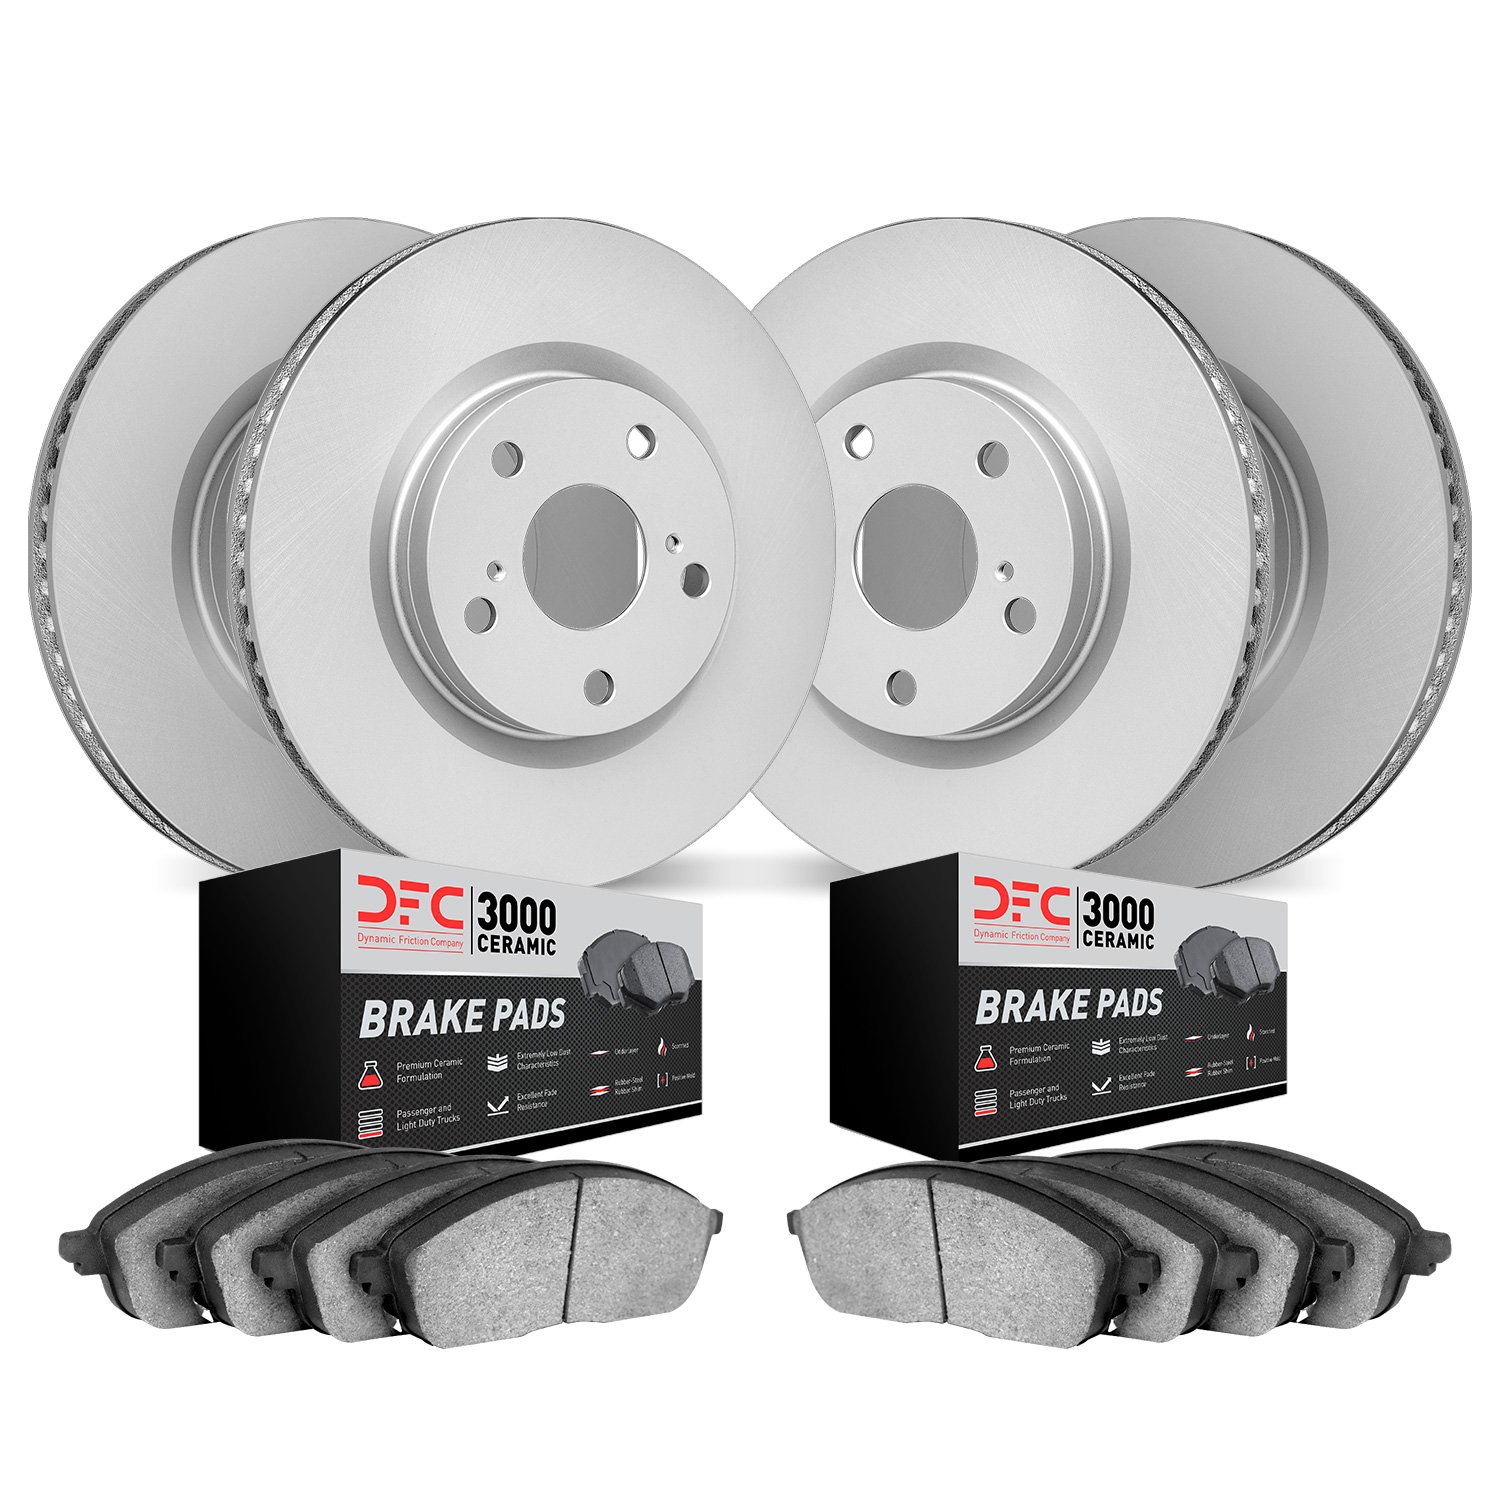 4304-31009 Geospec Brake Rotors with 3000-Series Ceramic Brake Pads Kit, 1996-2005 BMW, Position: Front and Rear